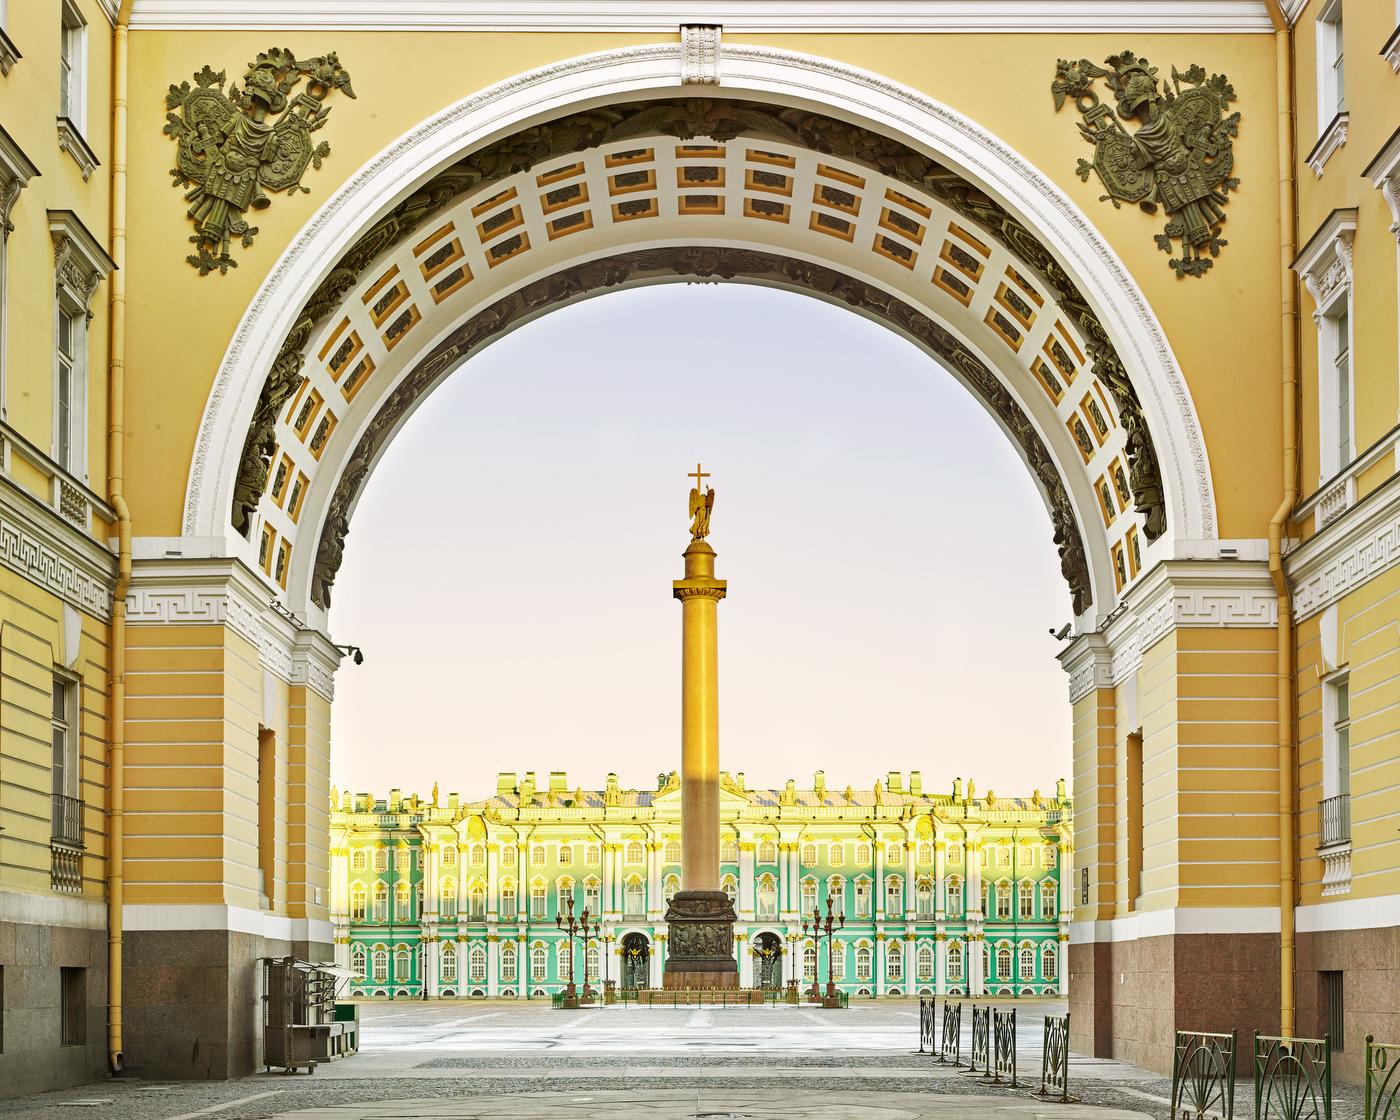 Palace Square, St Petersburg, Russia (44” x 55”)